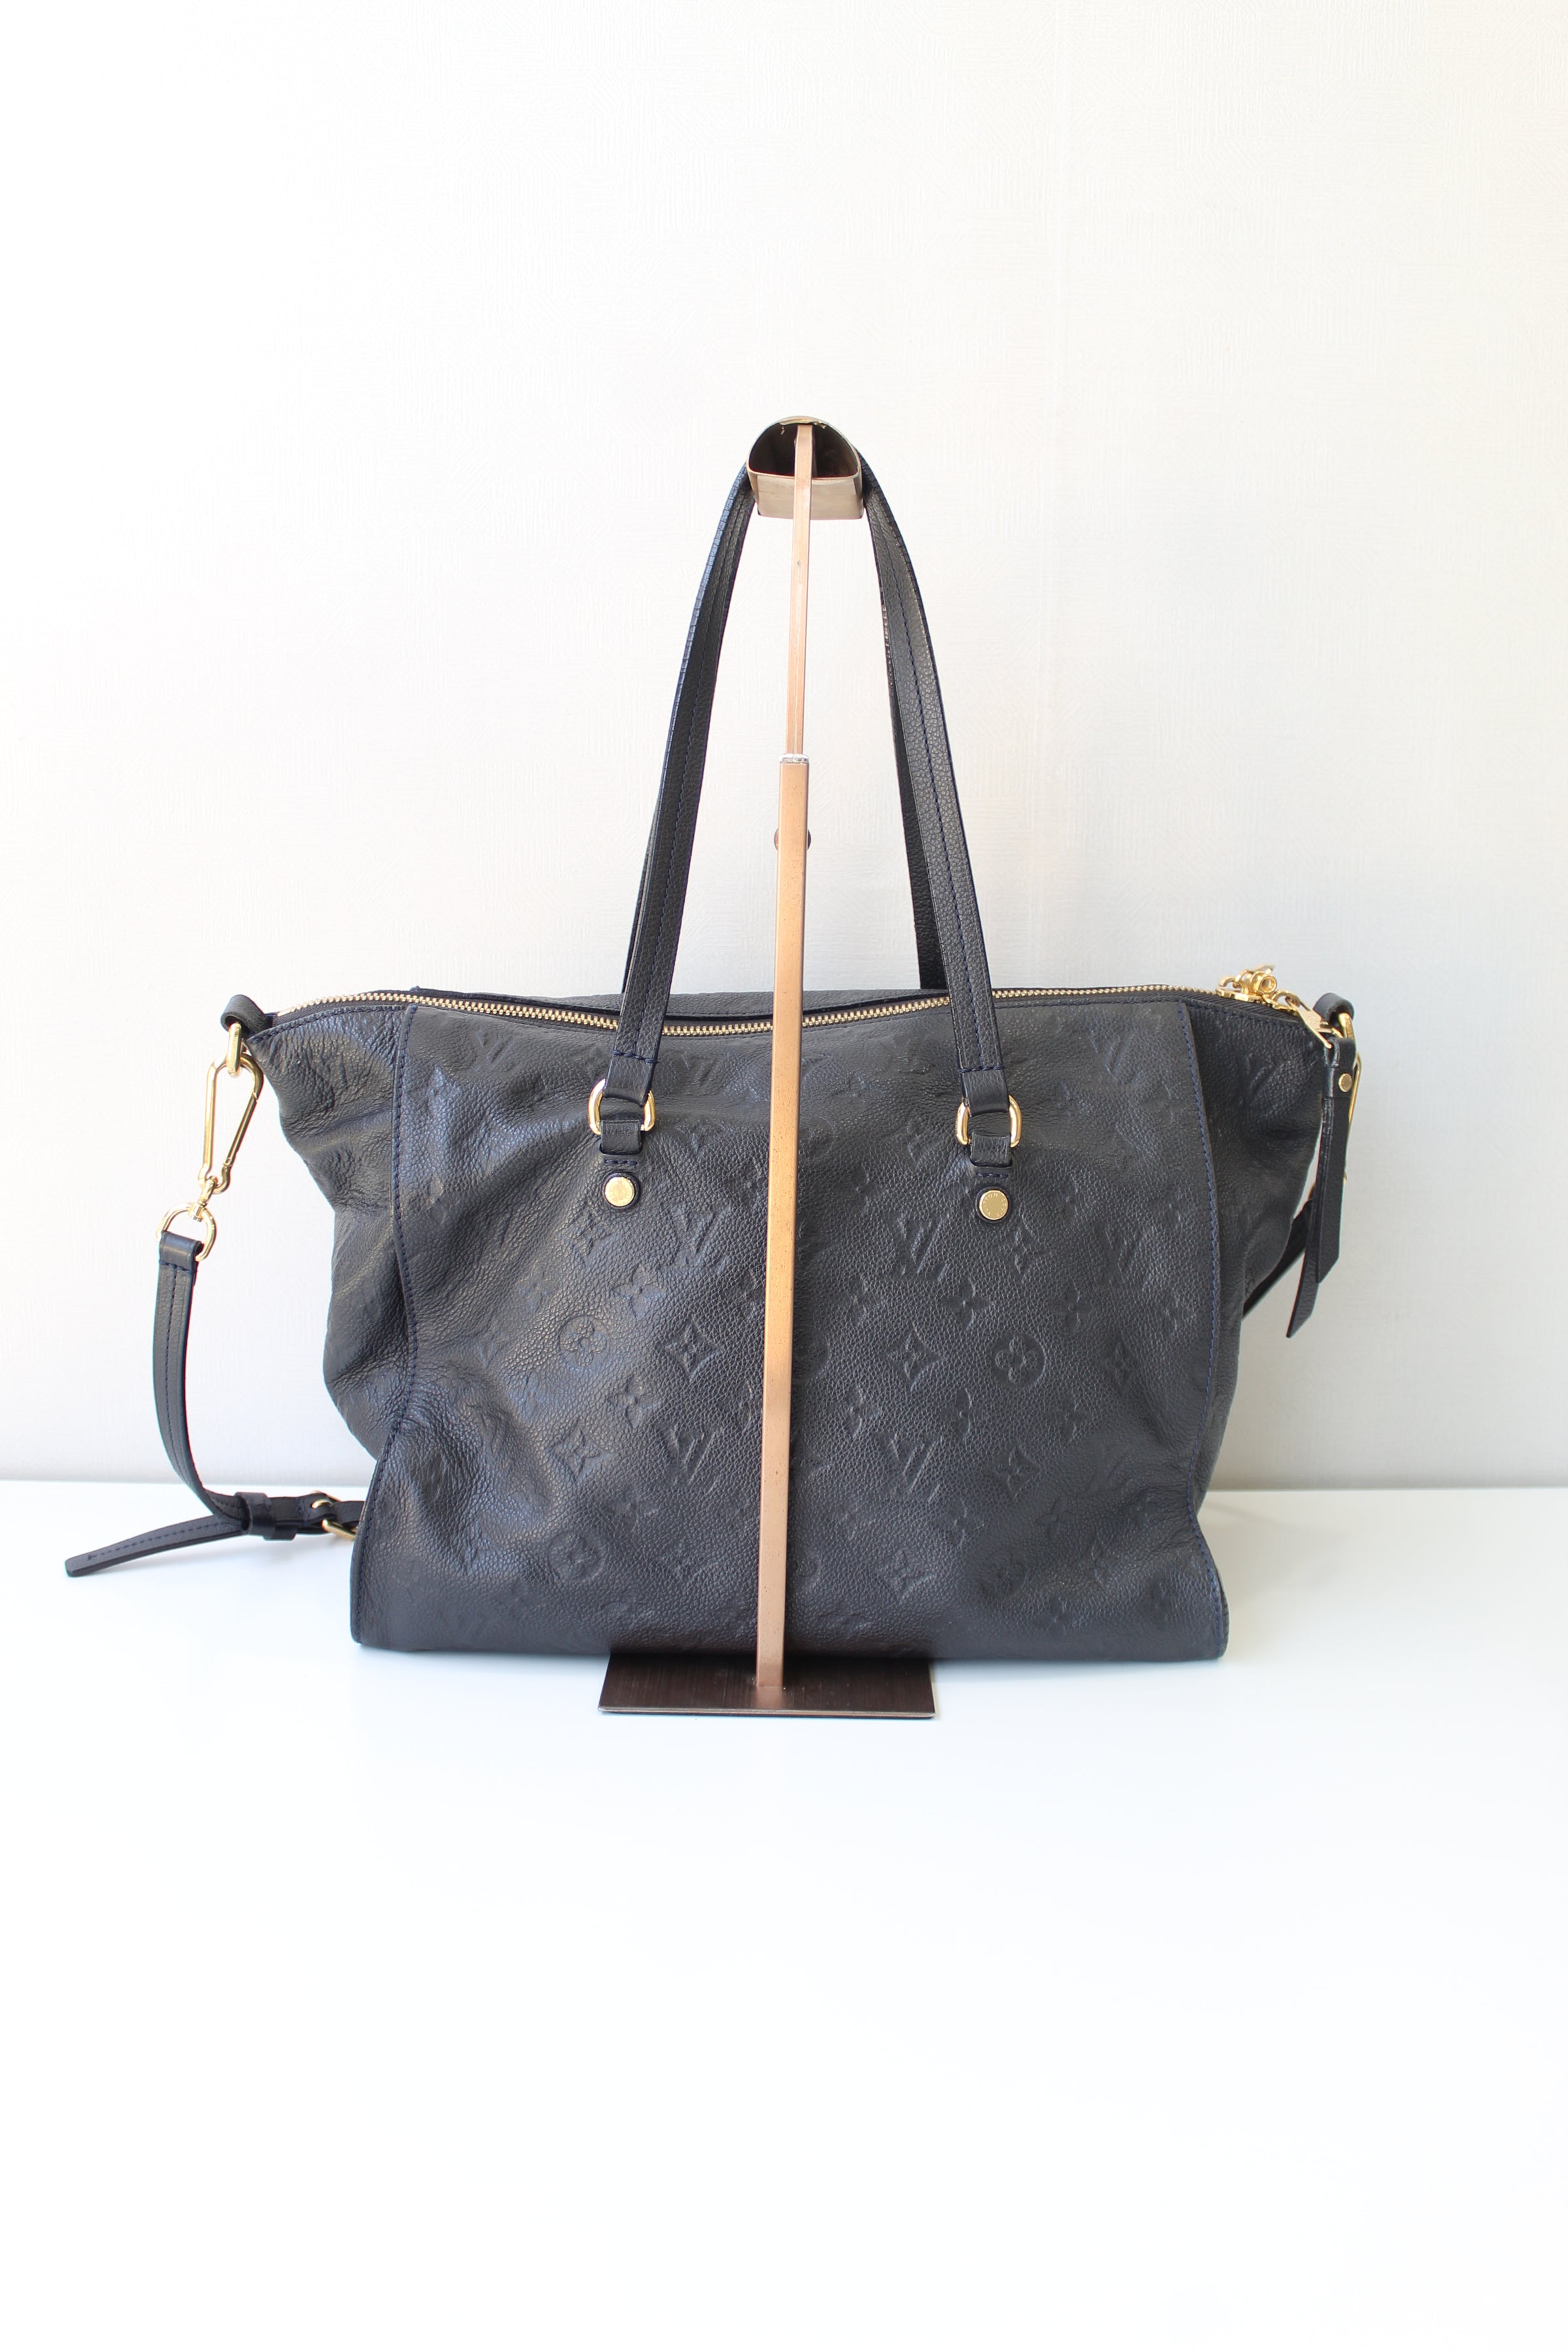 What's in my bag: Louis Vuitton Lumineuse pm 